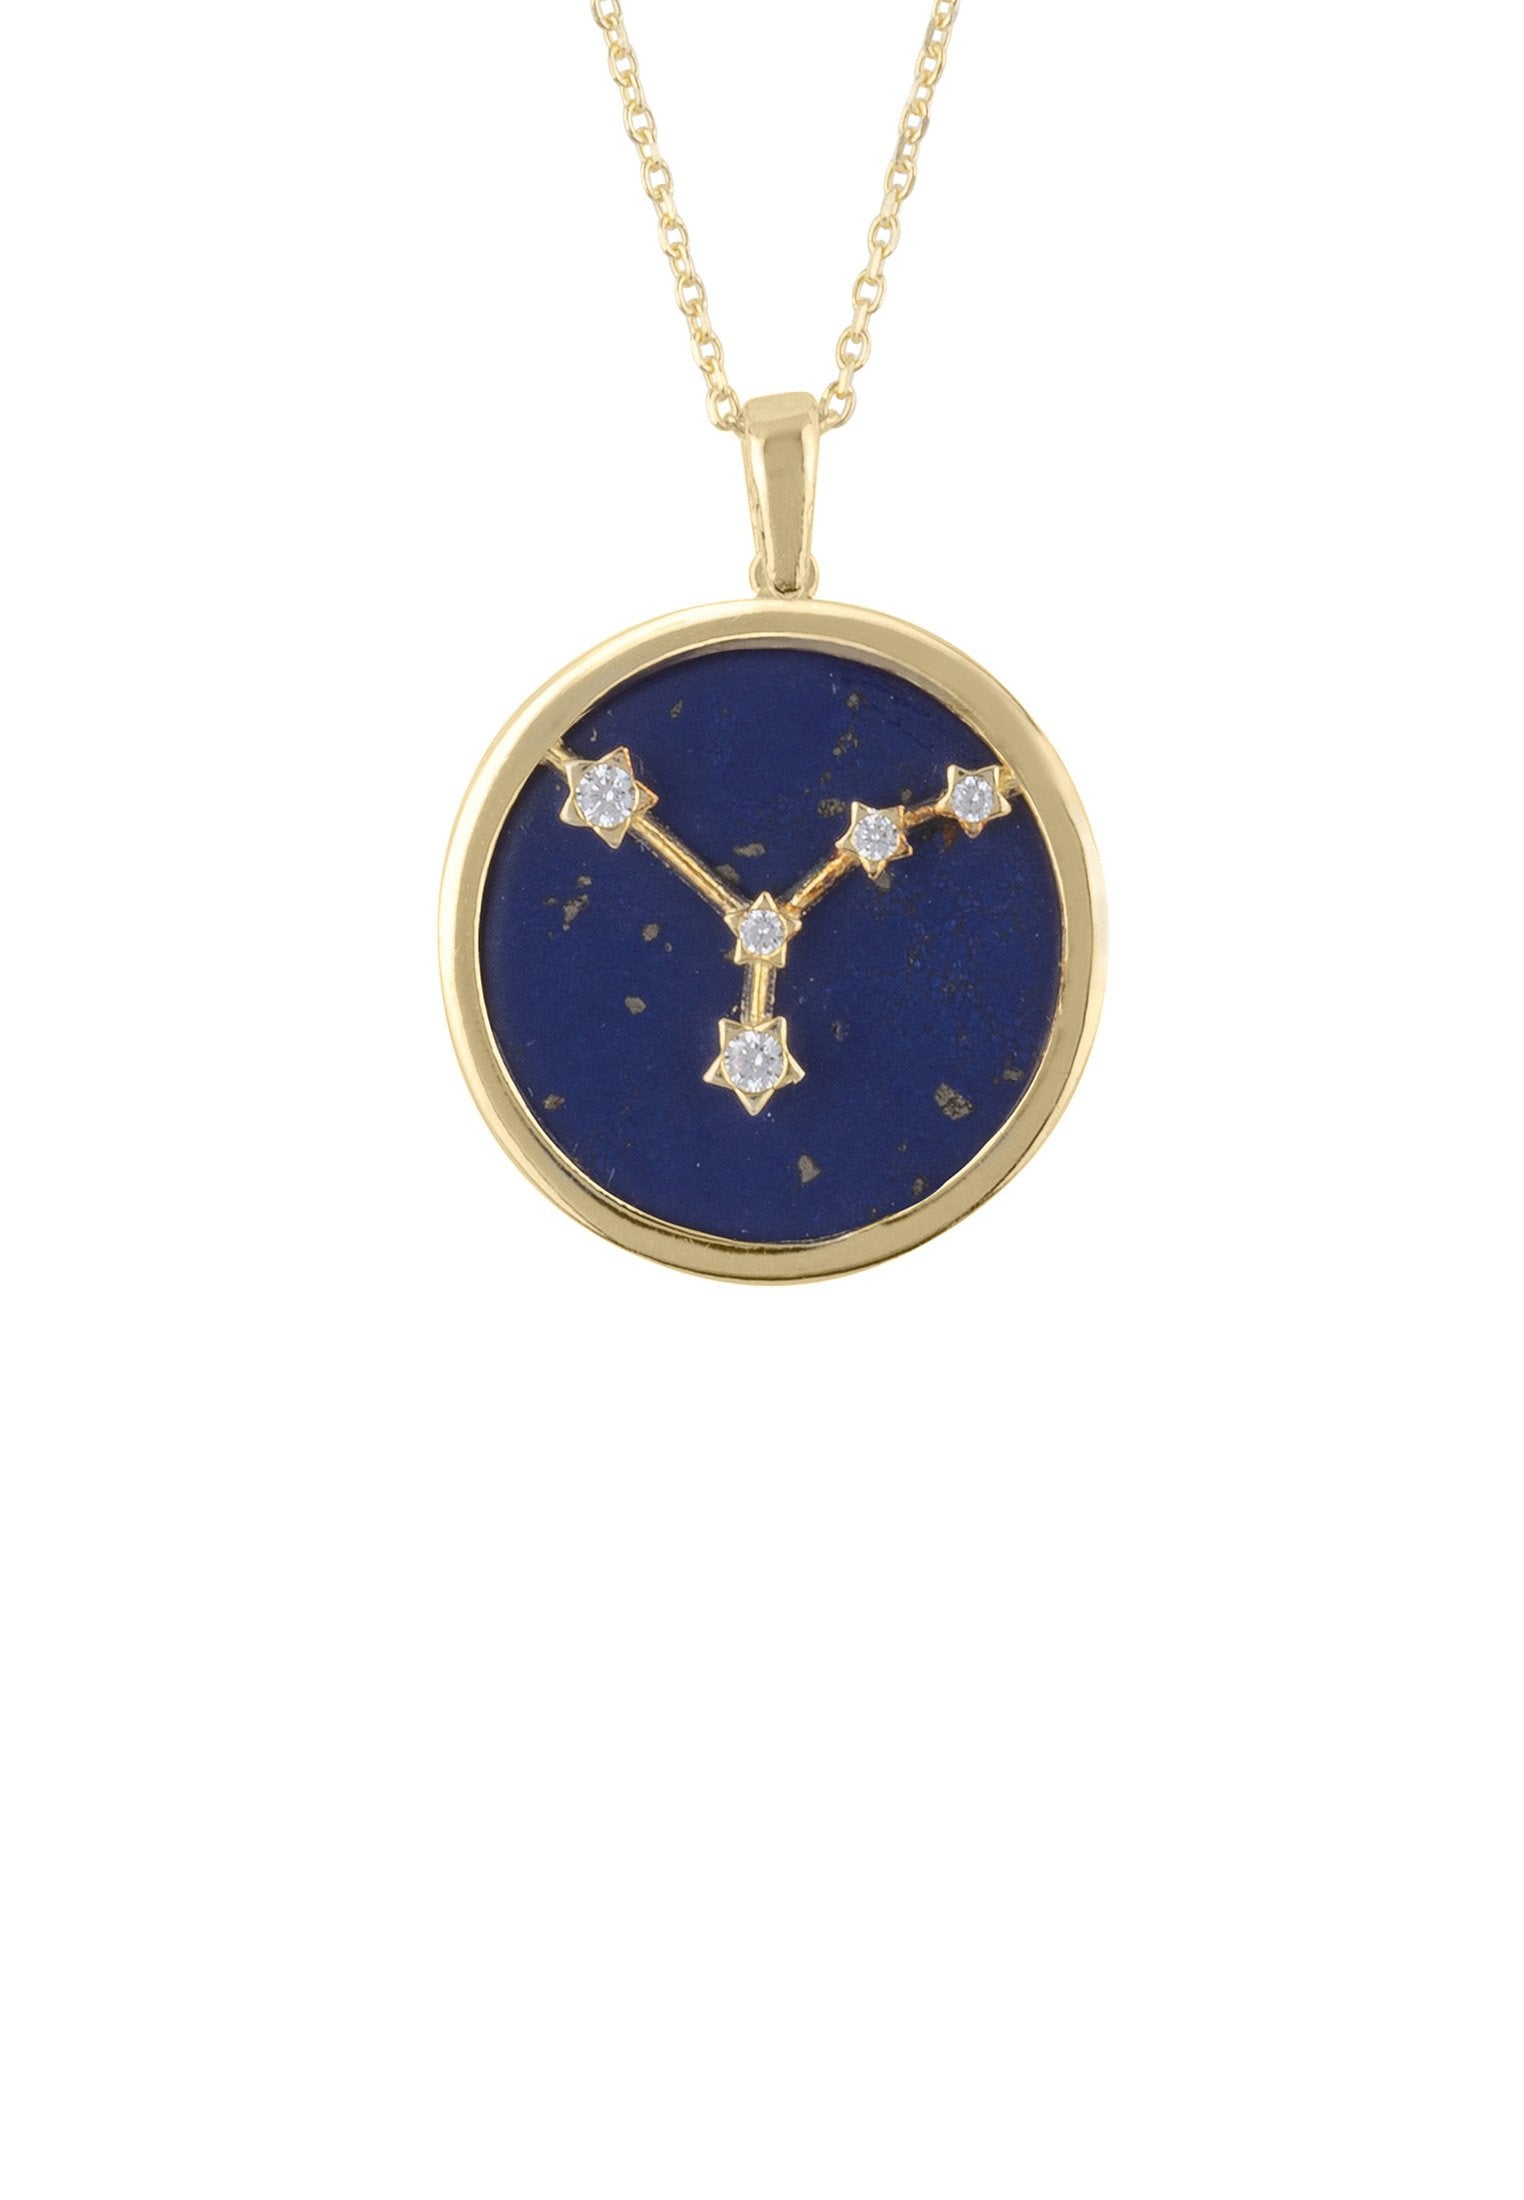 Personalized Necklaces - Zodiac Lapis Lazuli Star Constellation Pendant Necklace Gold Cancer 